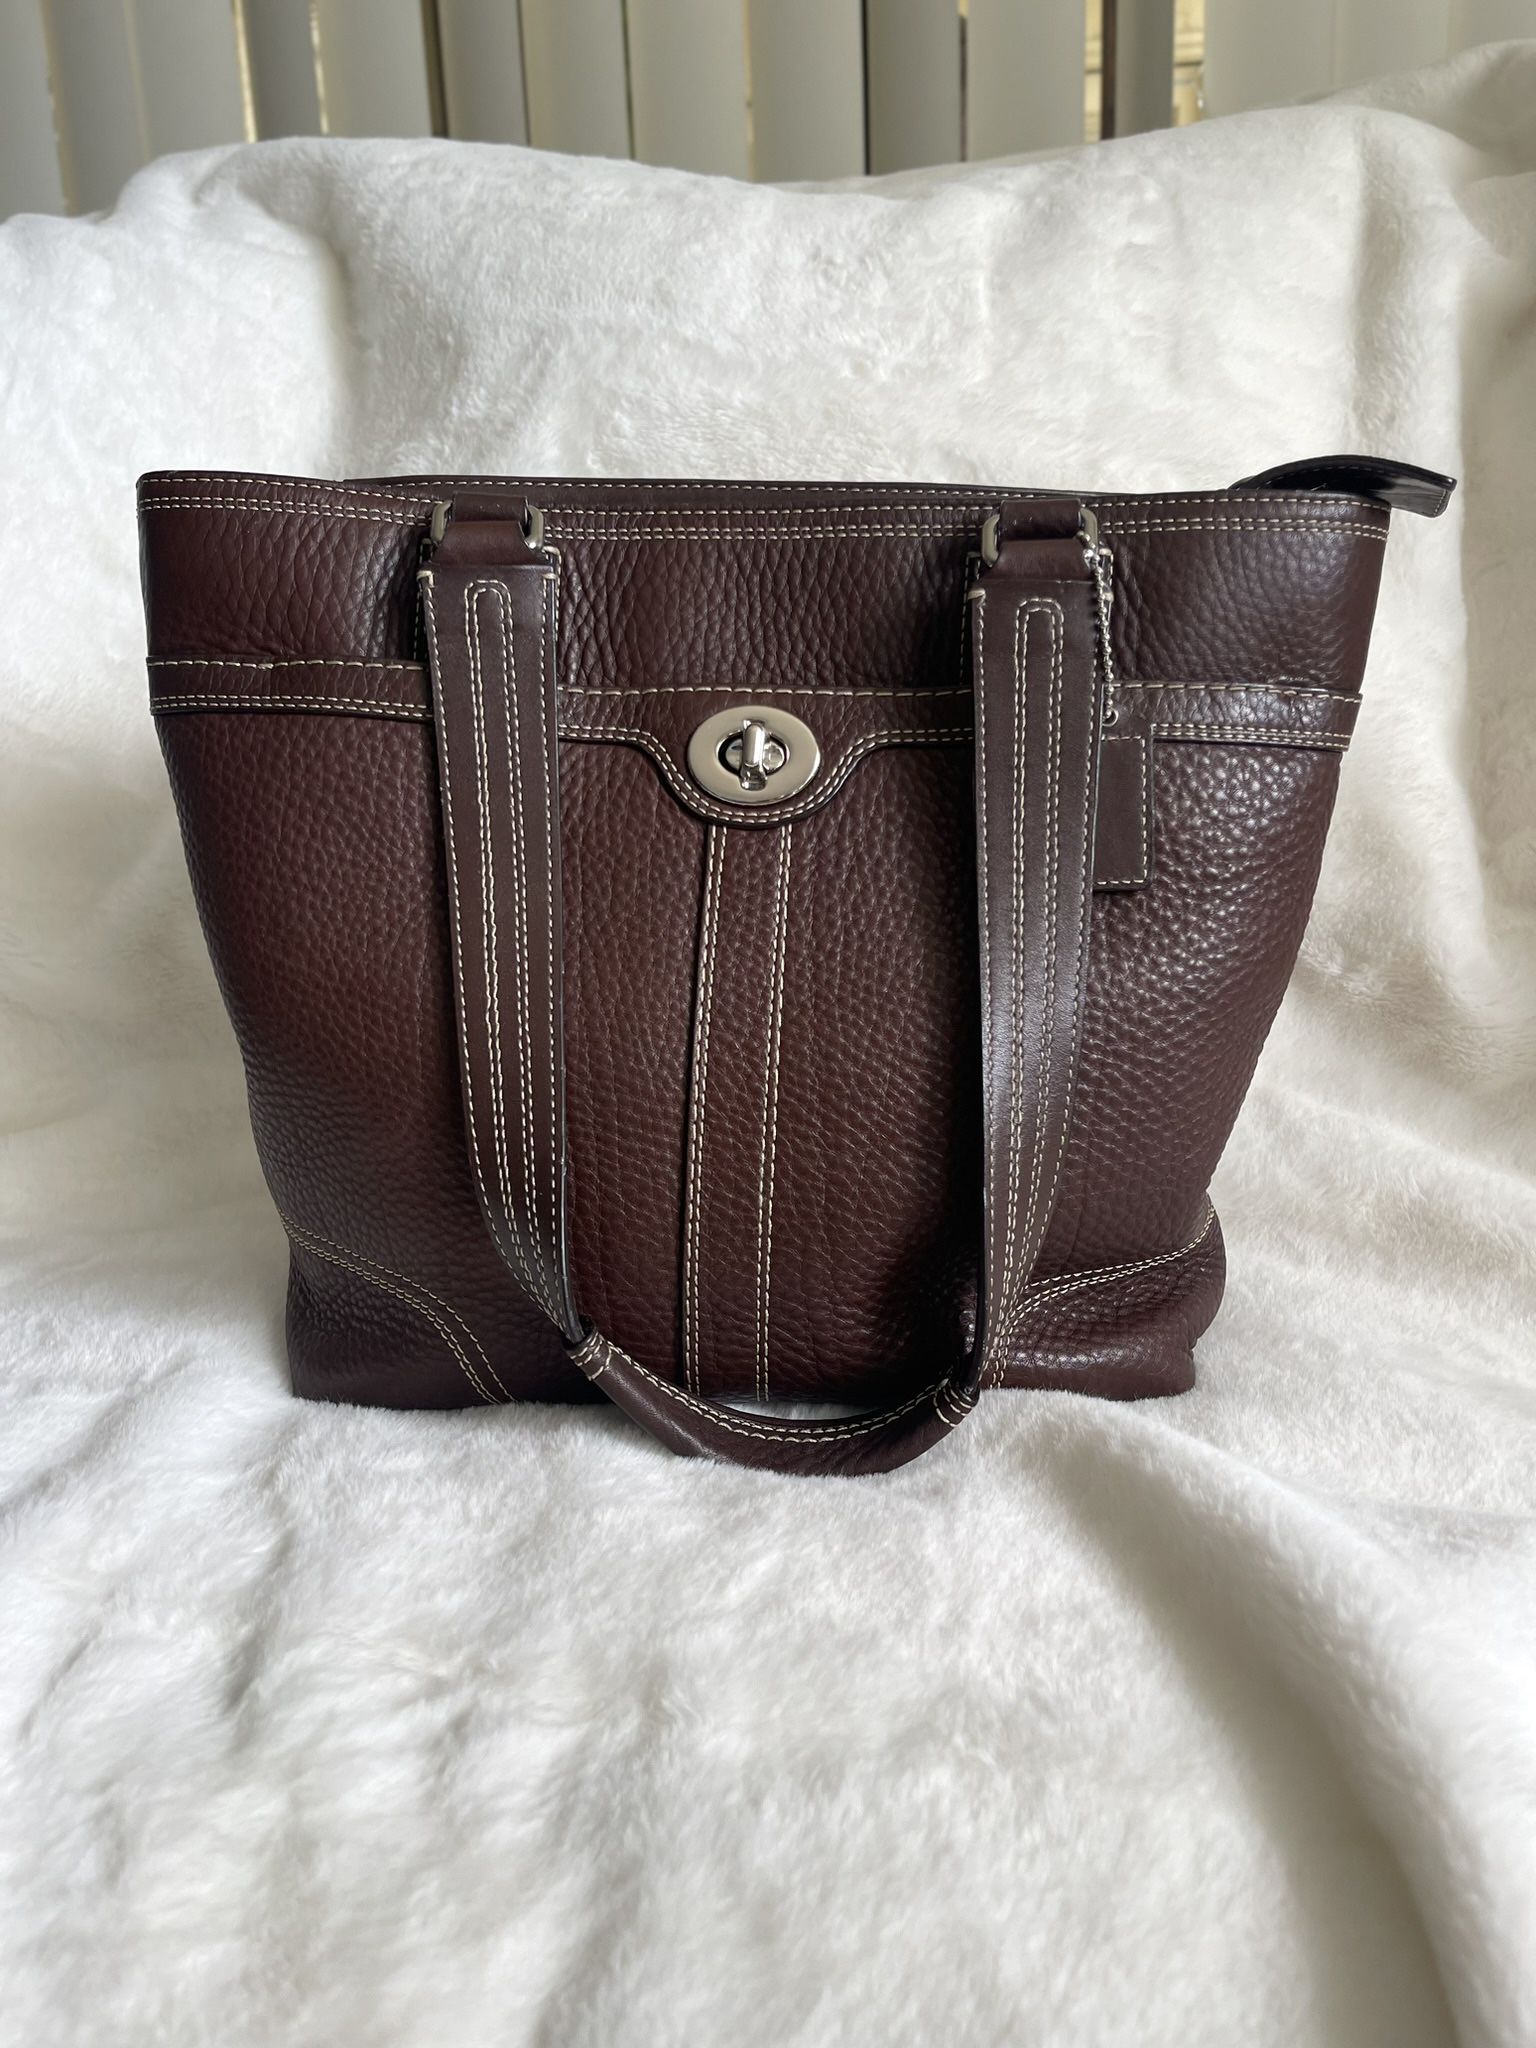 COACH Brown Leather Purse 